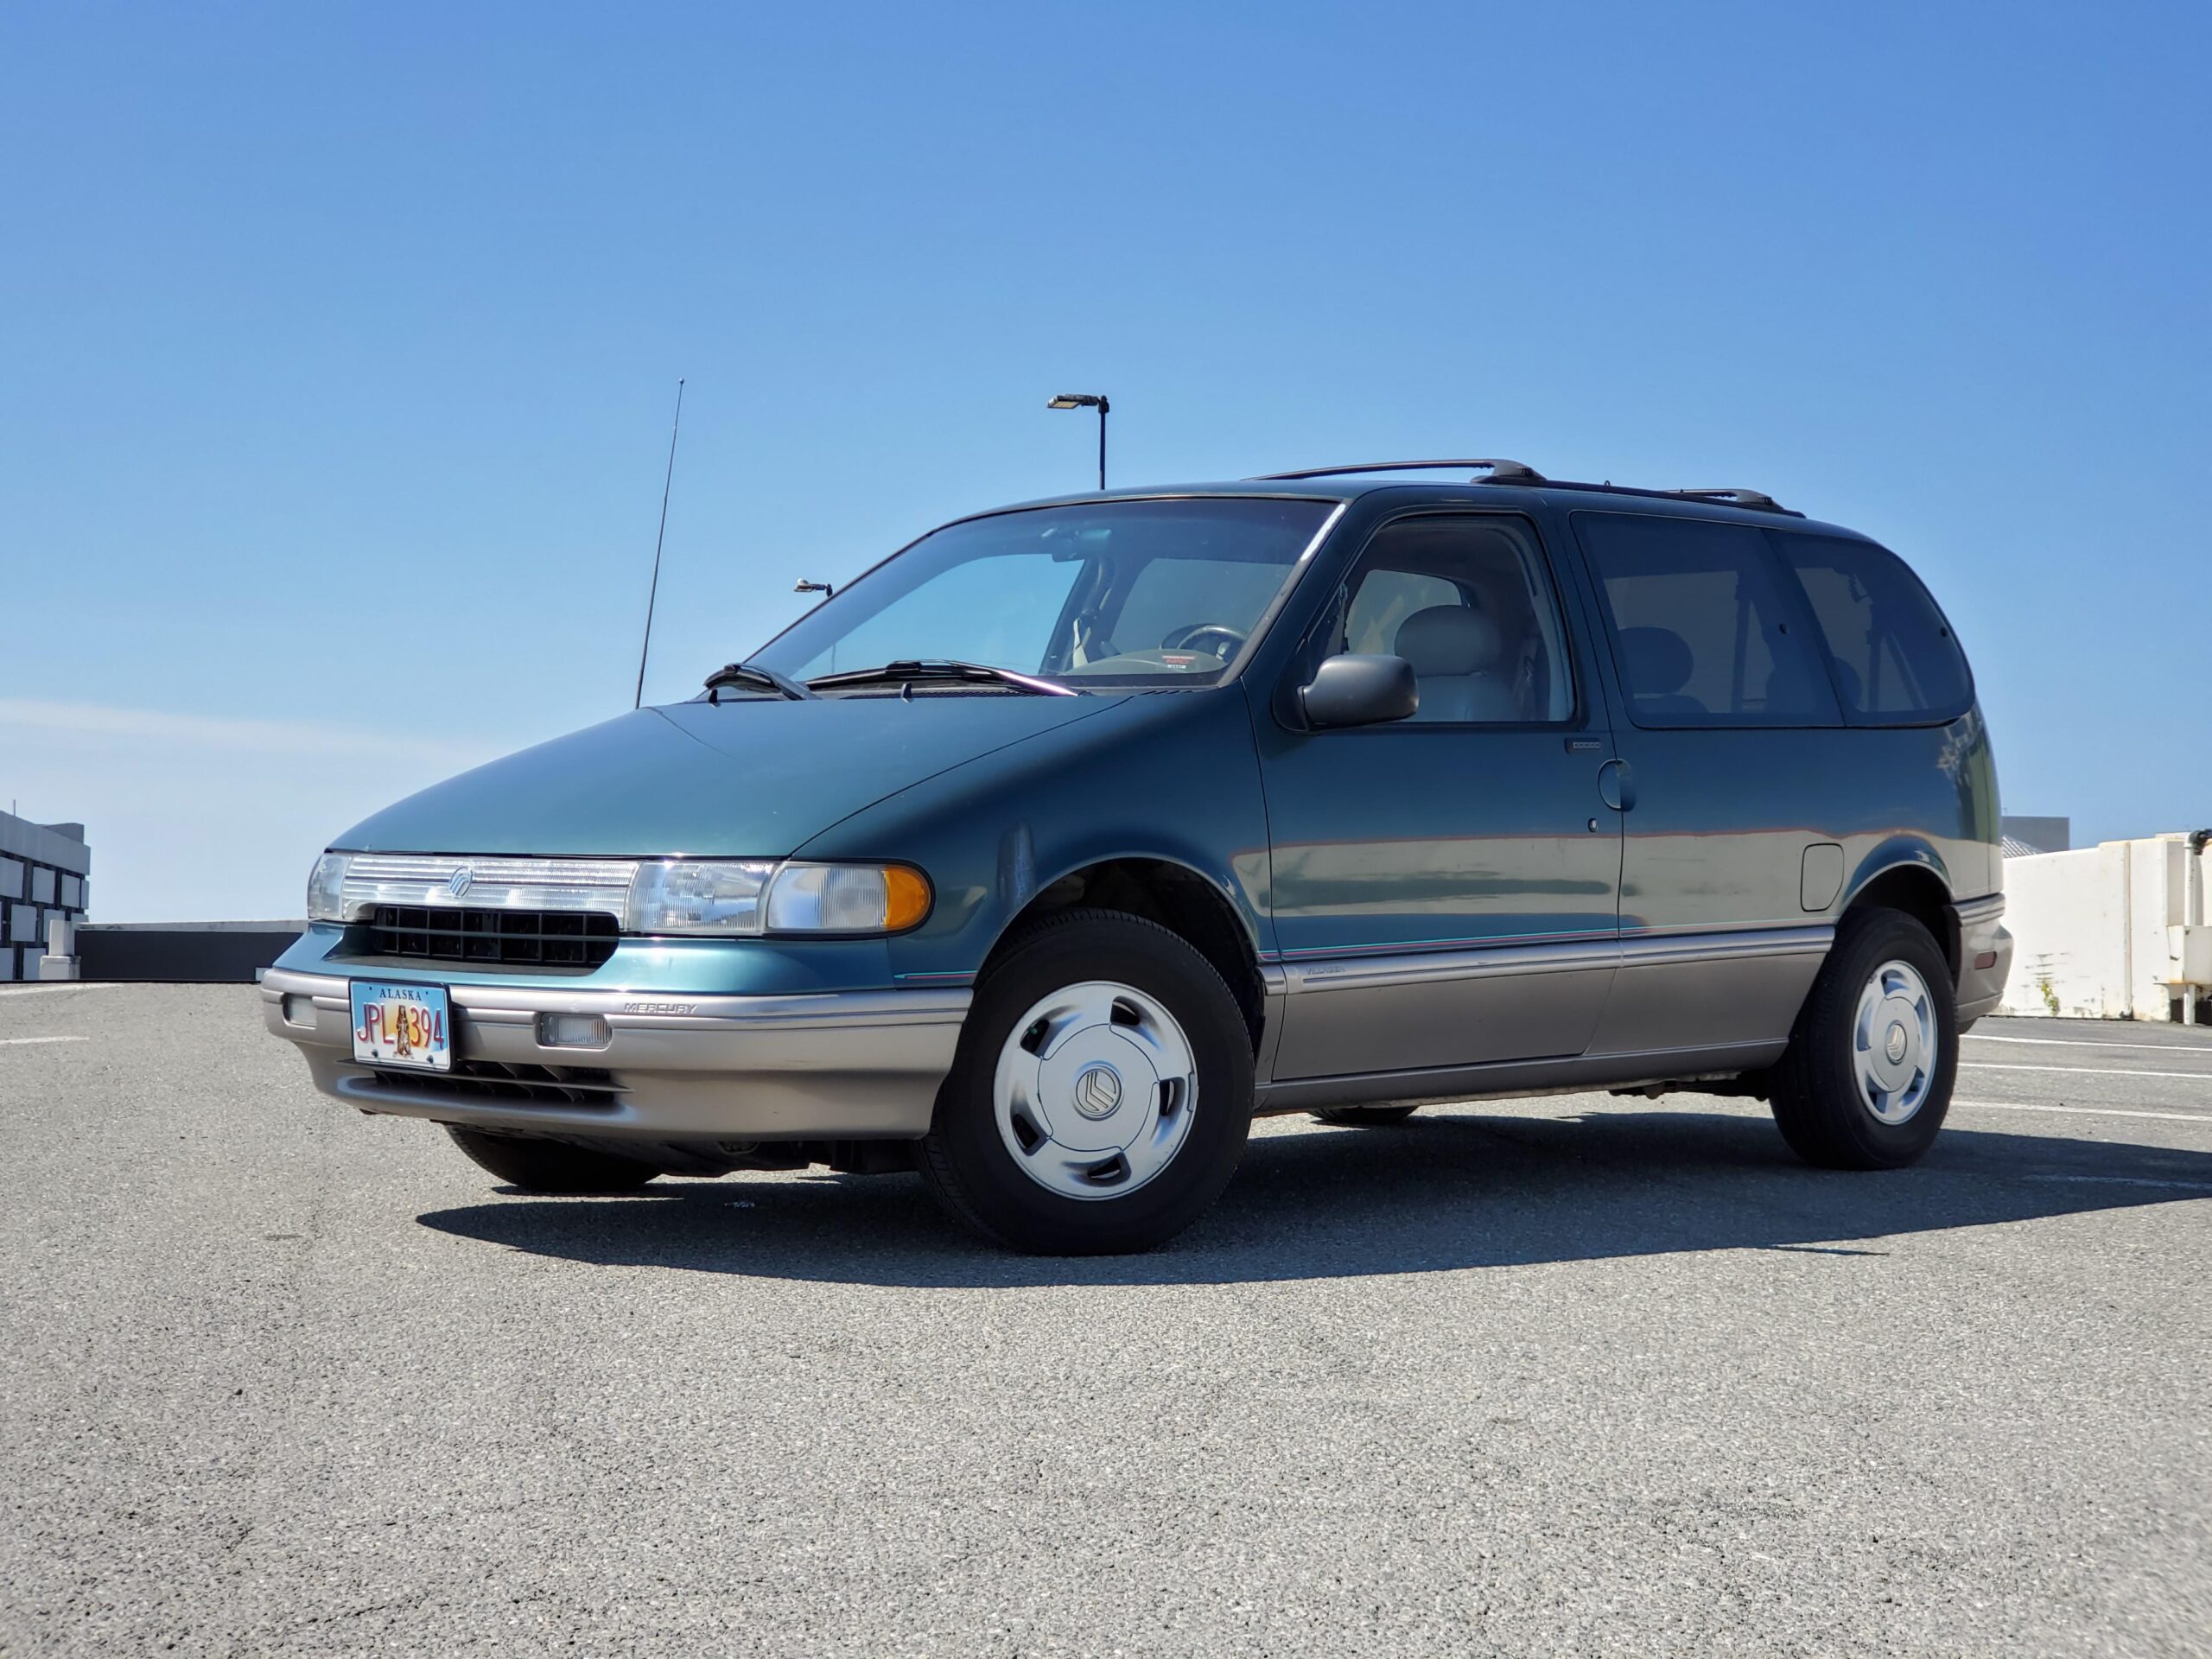 1995 Mercury Villager: Addressing Problems and Complaints